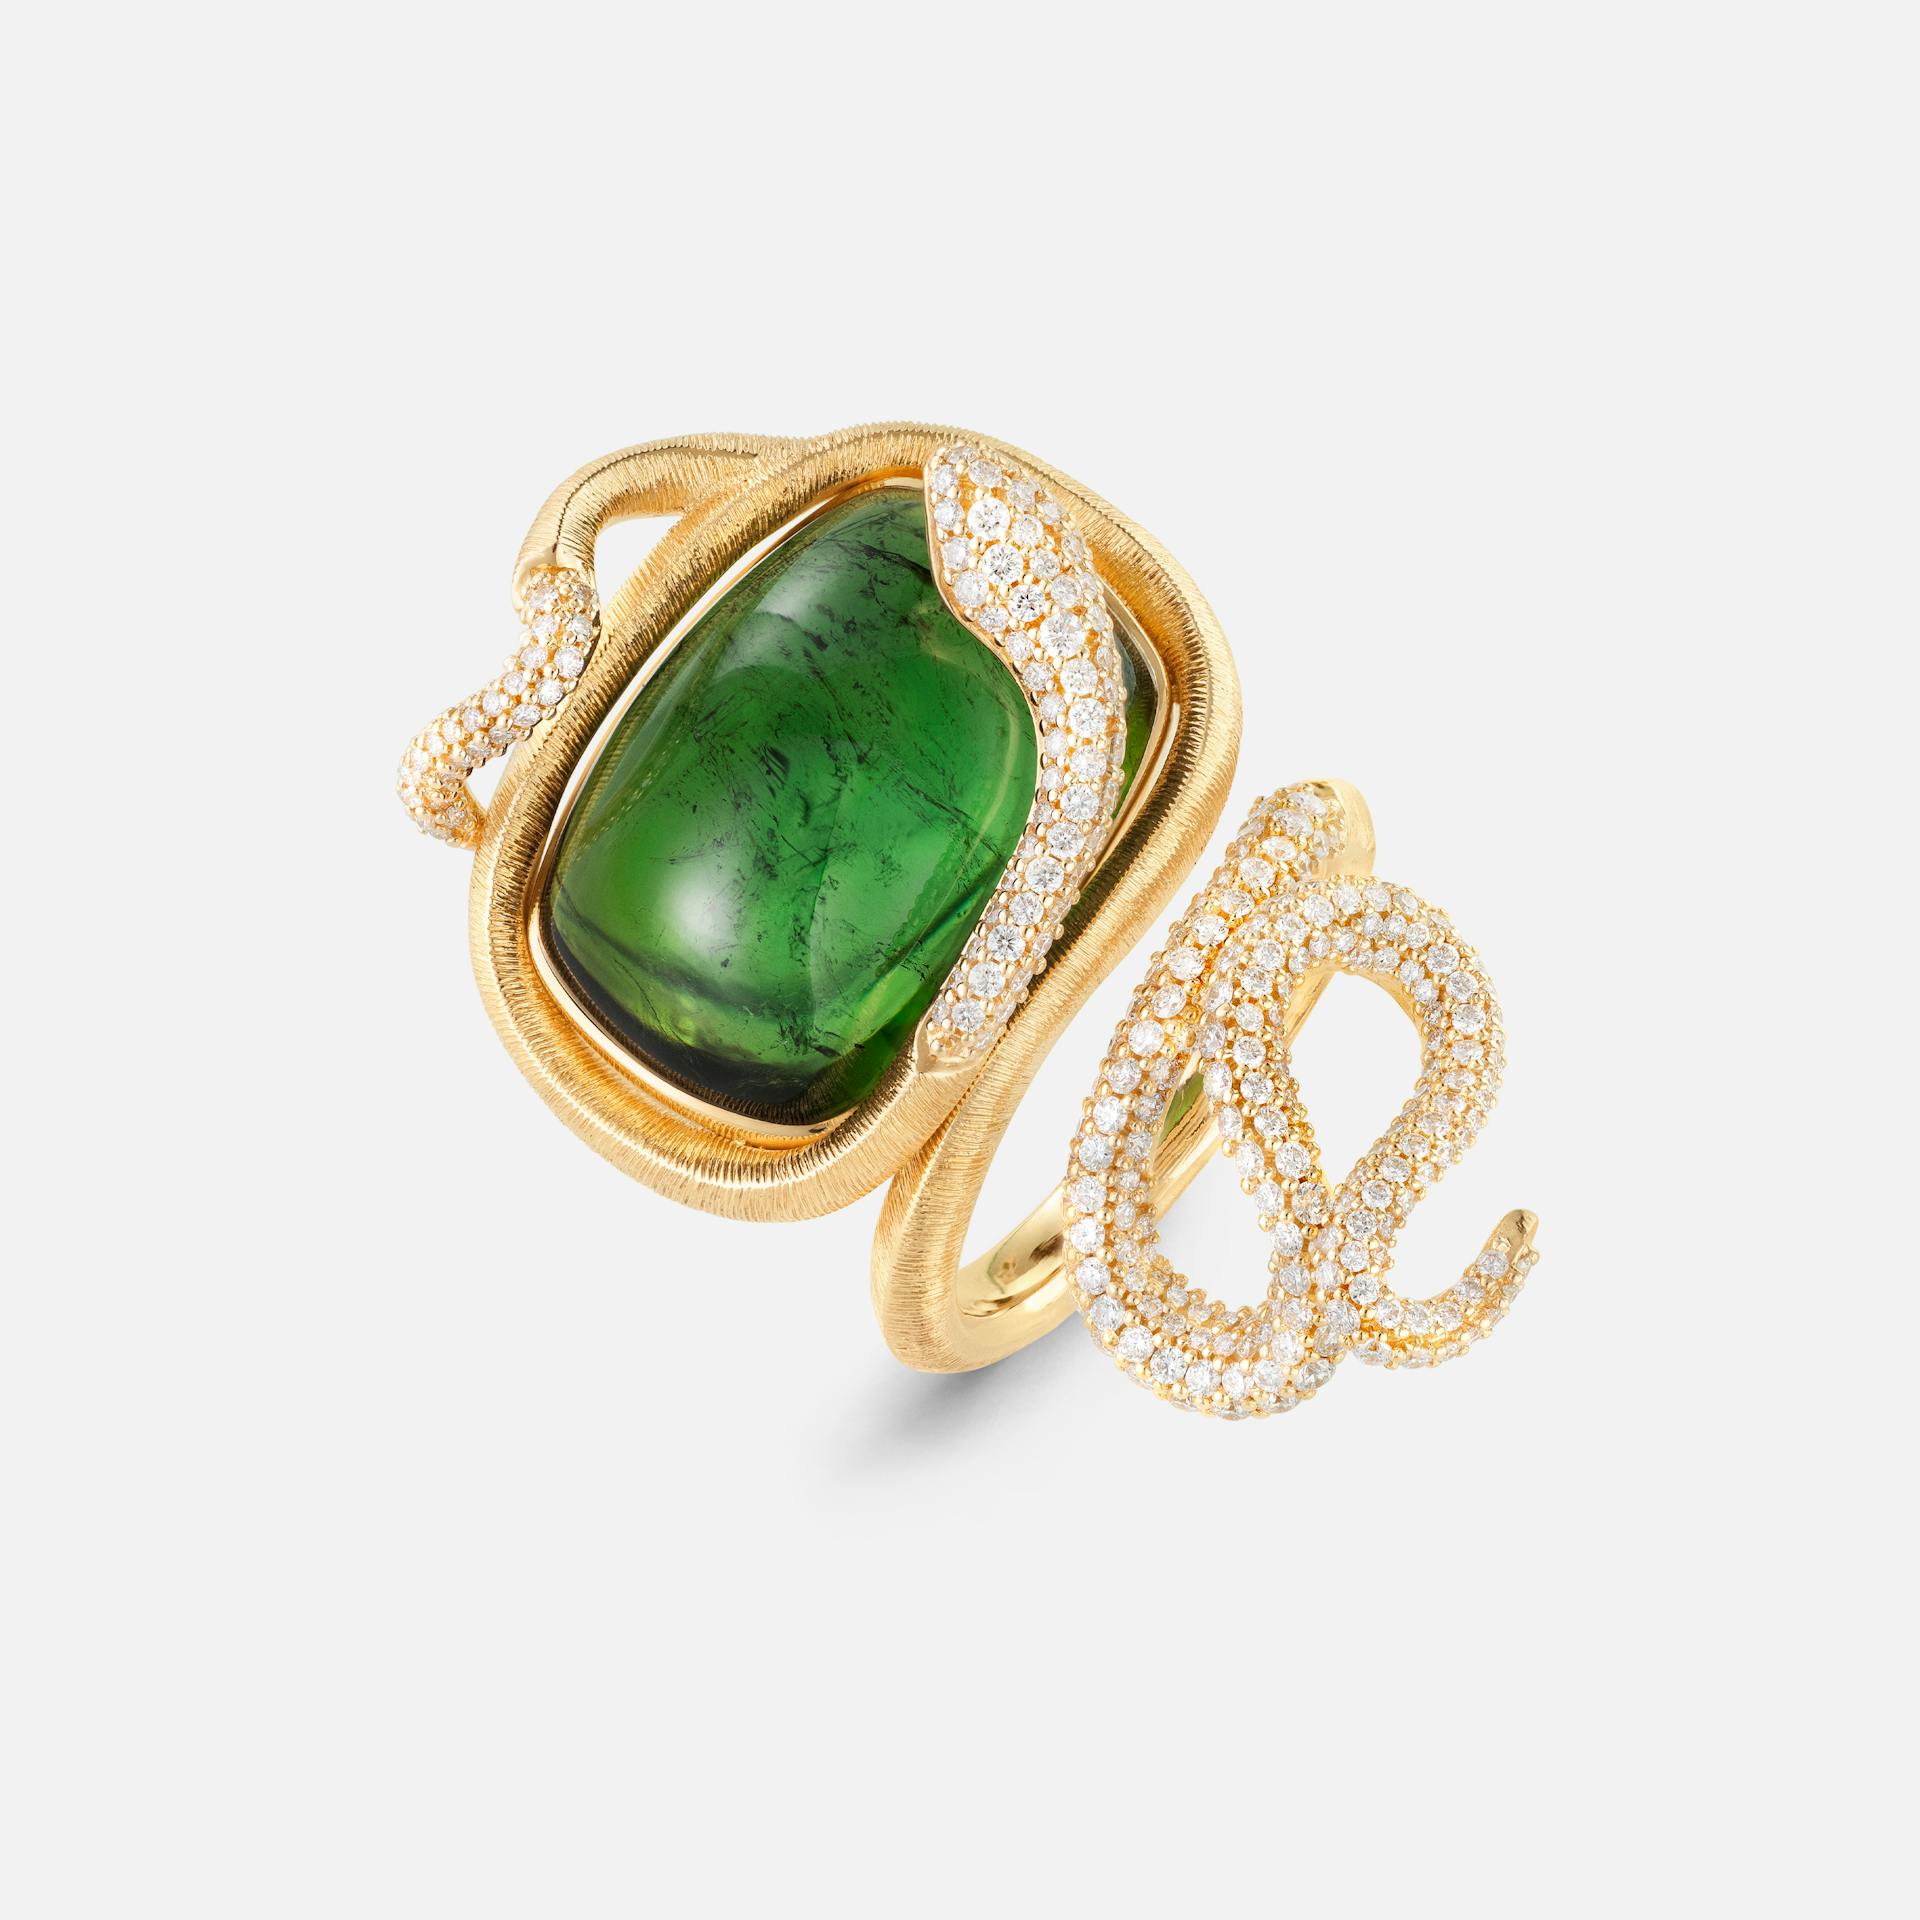 Snakes ring 18k gold with green tourmaline and diamonds 3.48 ct. TW.VS